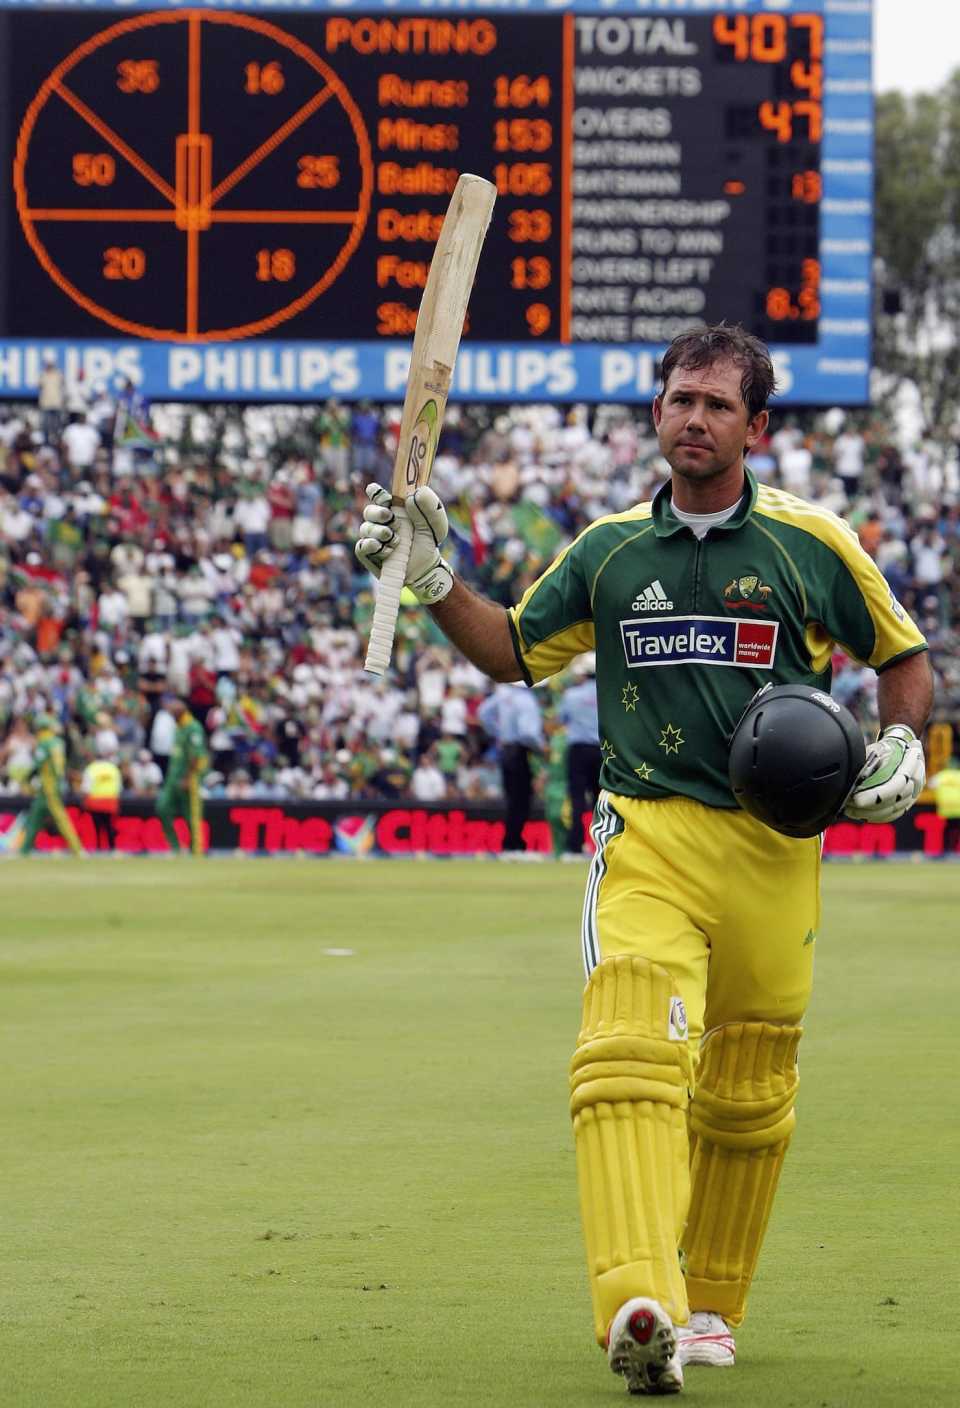 Ricky Ponting leaves the field after his 164, South Africa v Australia, 5th ODI, Johannesburg, March 12, 2006